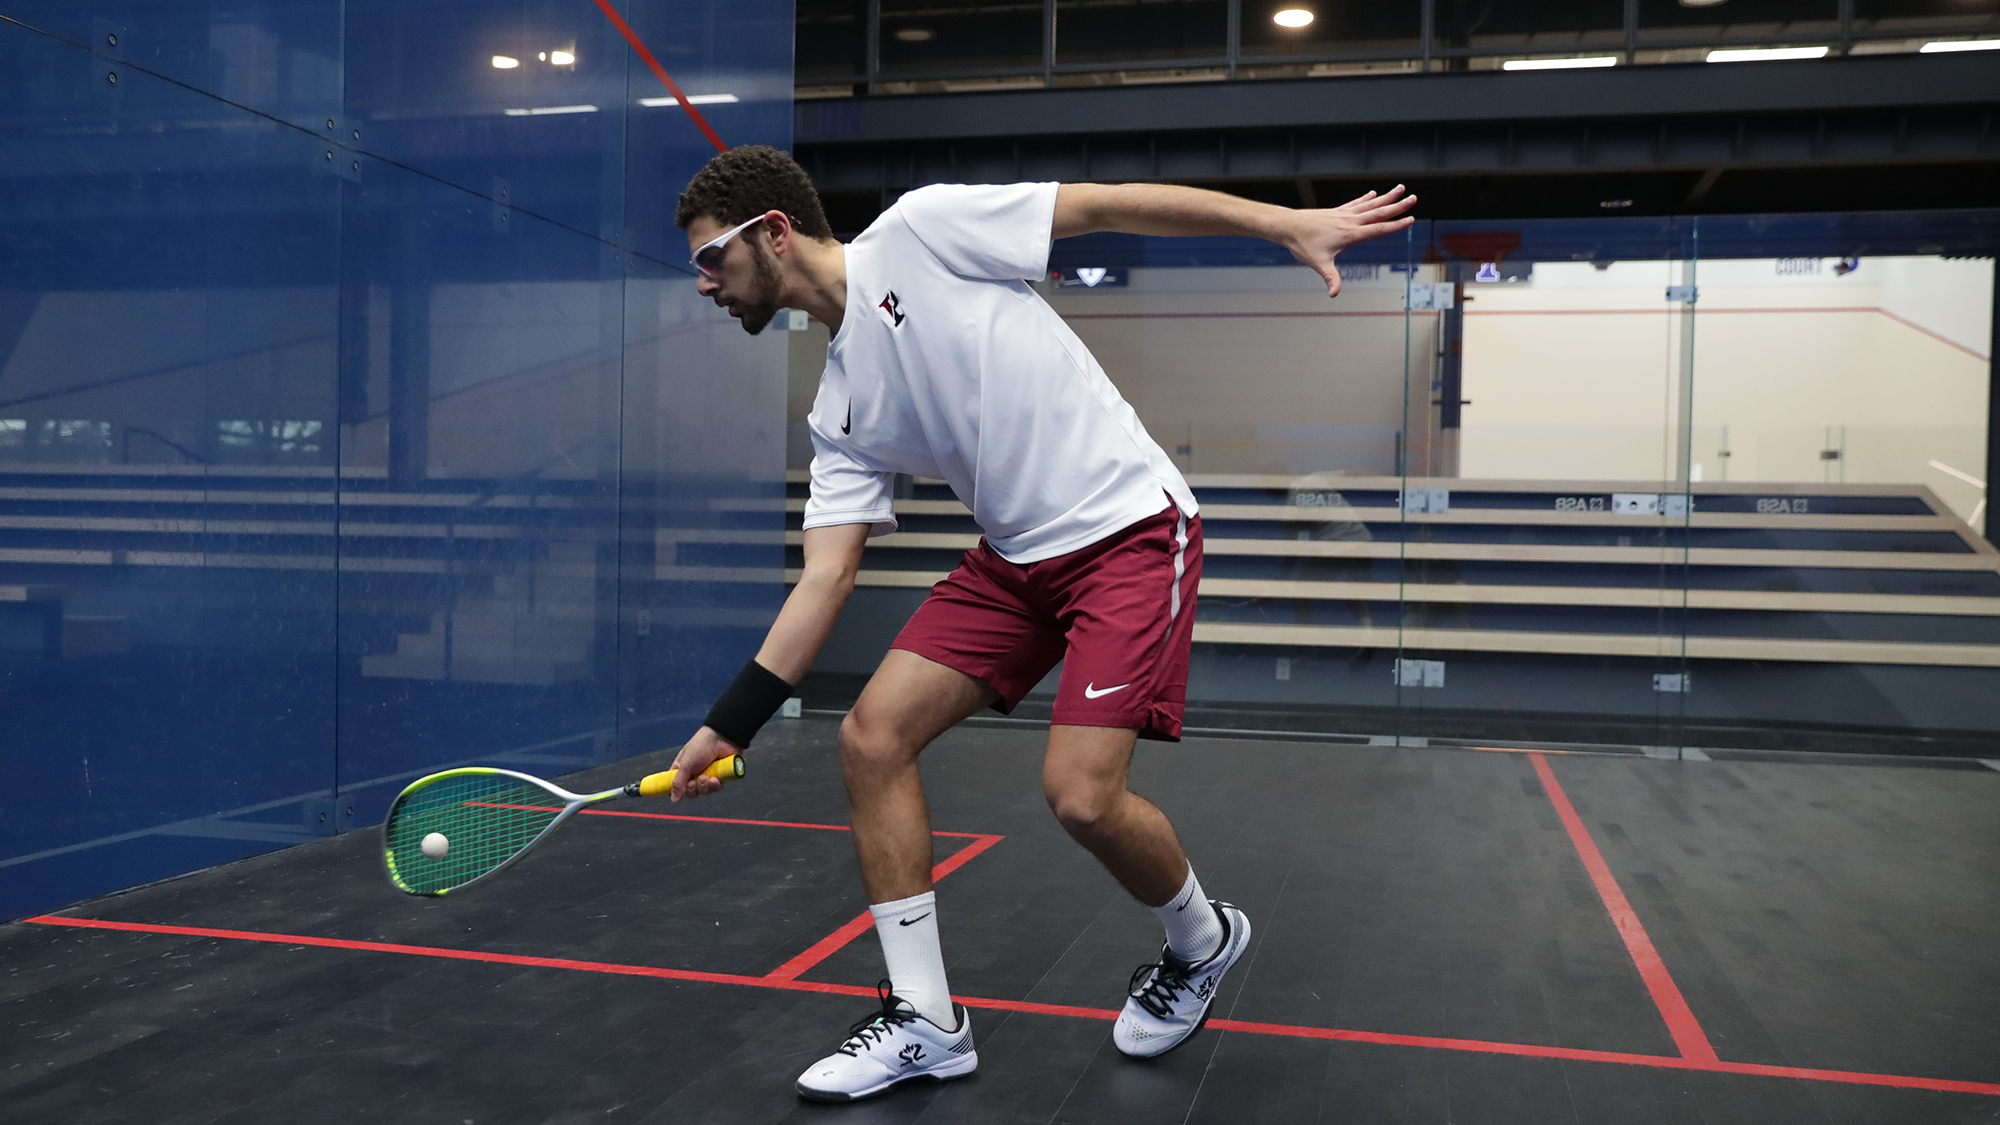 Aly Abou Eleinen hits the ball down by his feet.